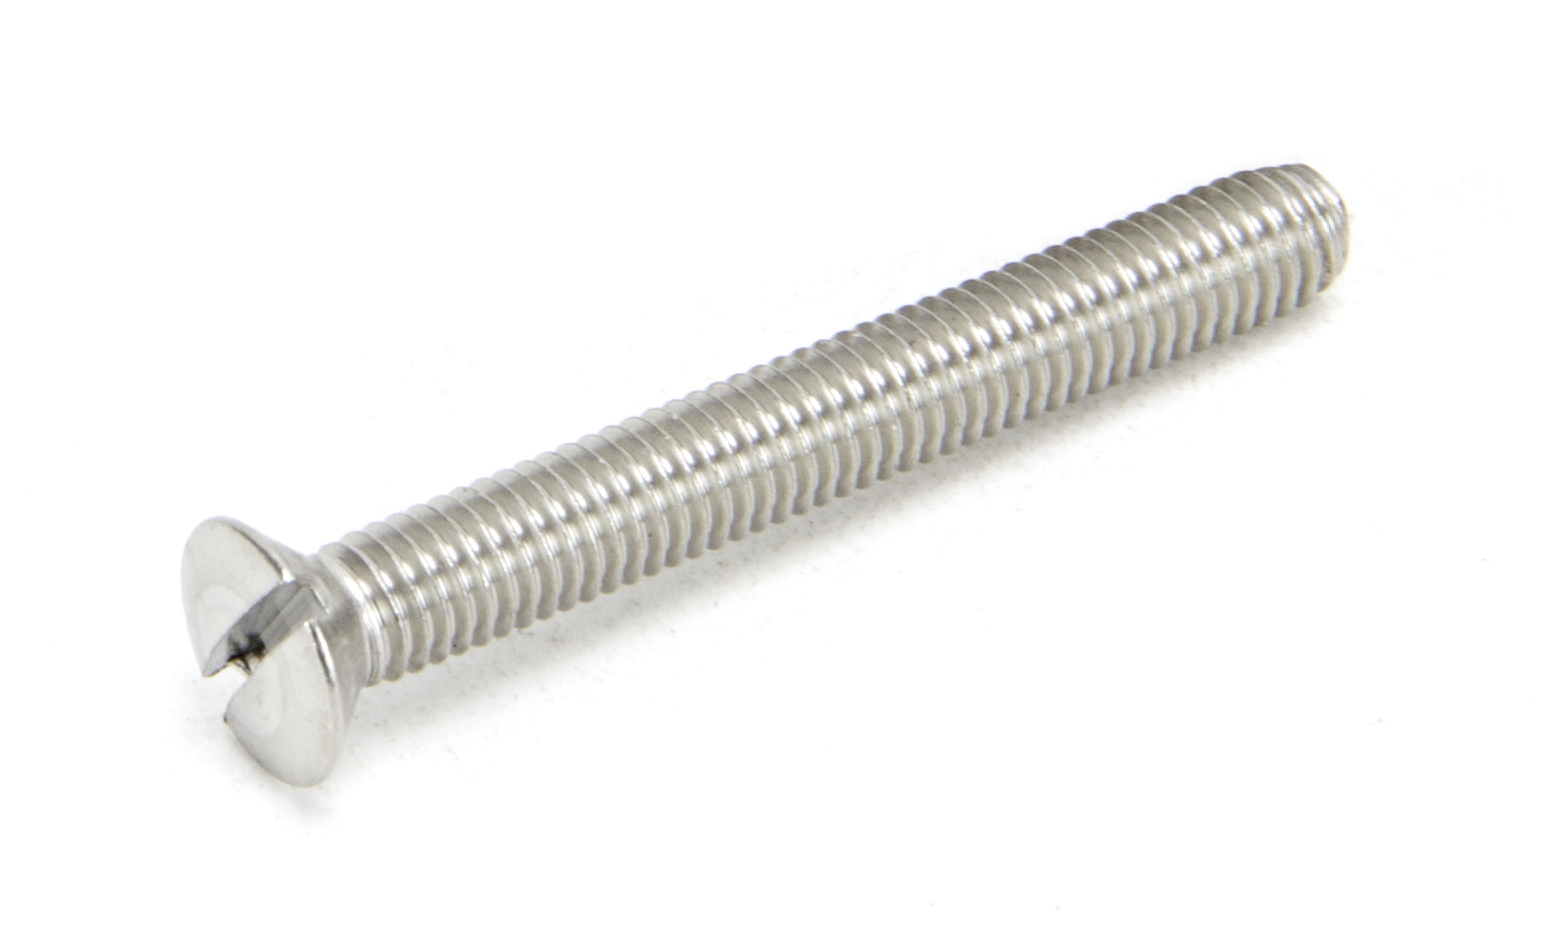 Stainless Steel Male Screw - M5 x 40mm - Each